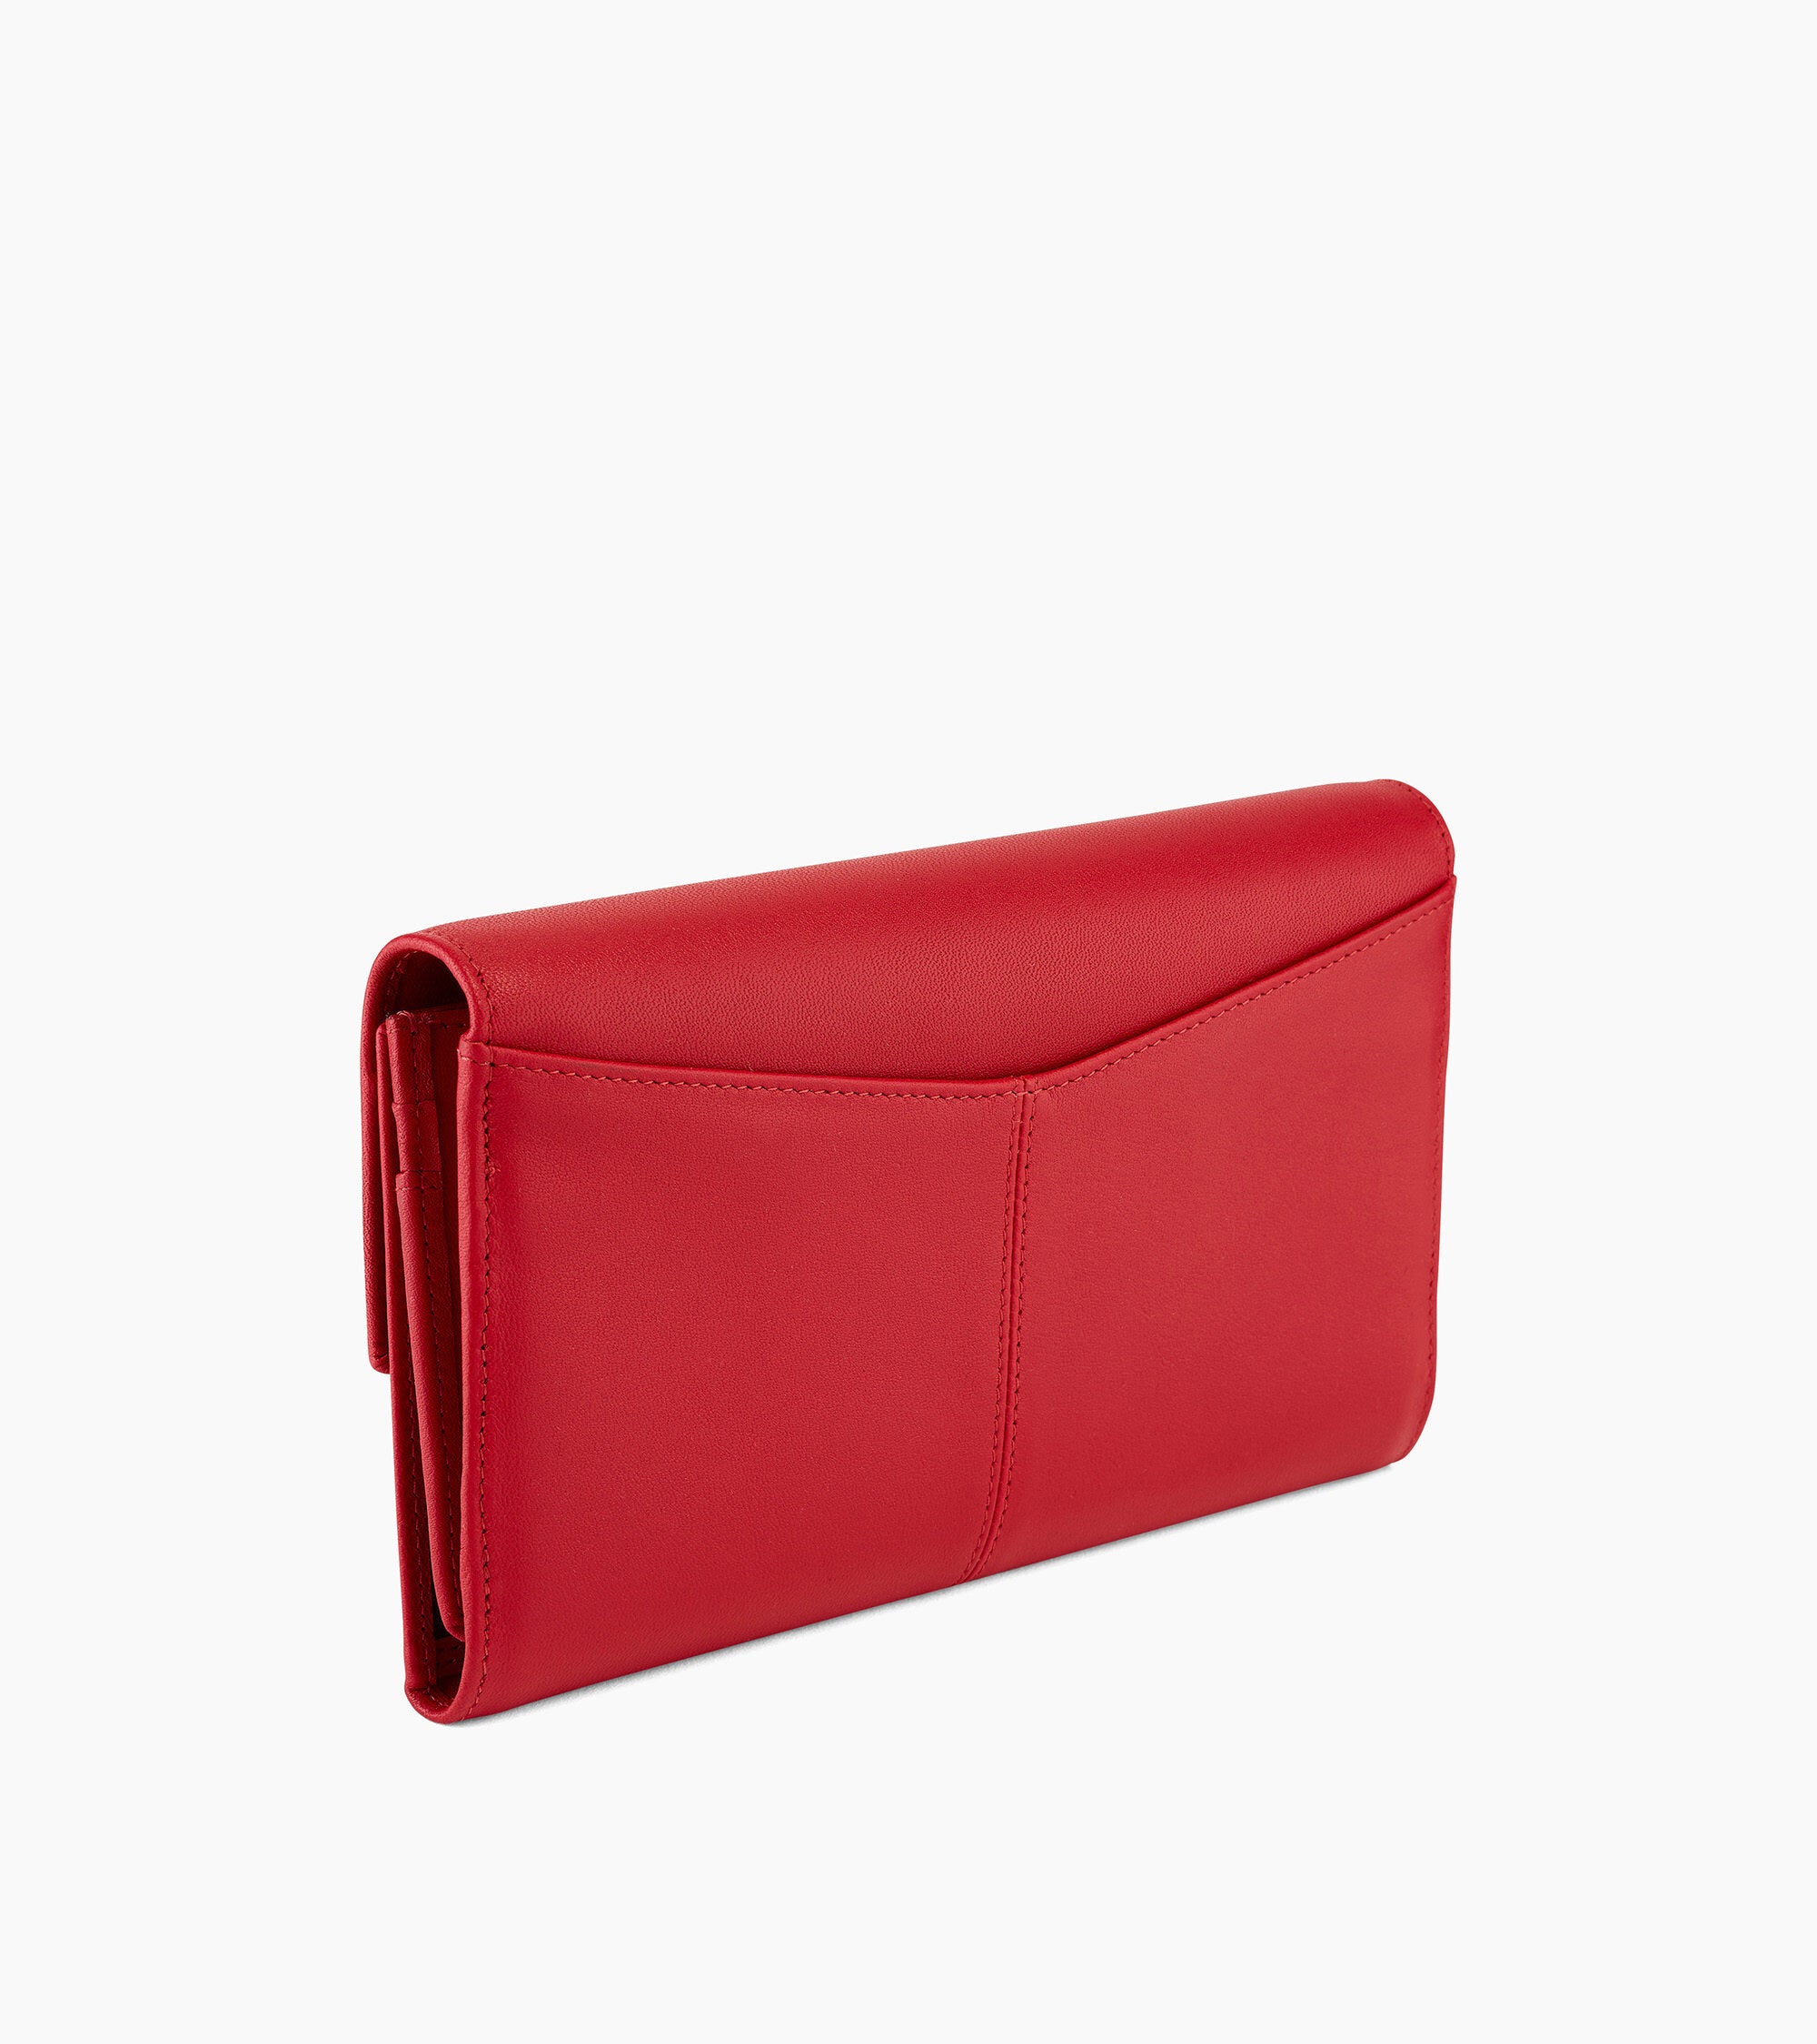 Charlotte flap smooth leather organizer wallet